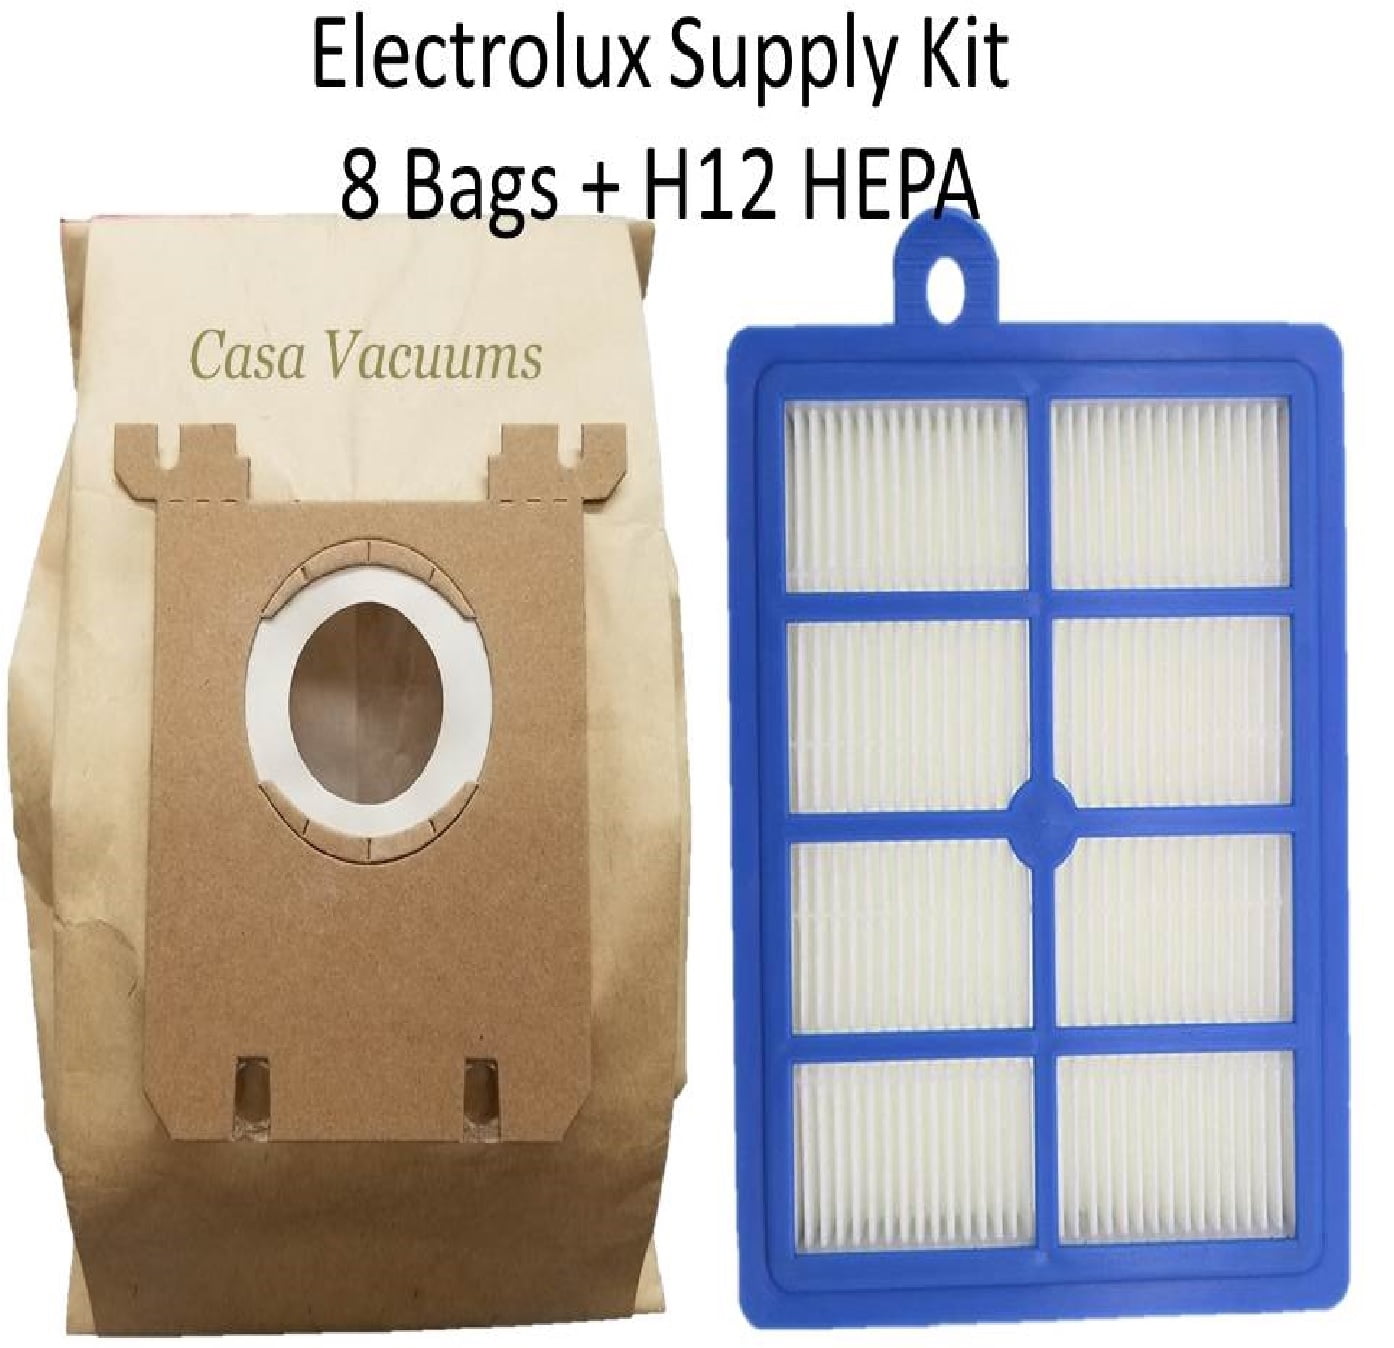 Electrolux H12 Hepa Filter EL012W fits Oxygen Jet Maxx Harmony Canister Vacuum 